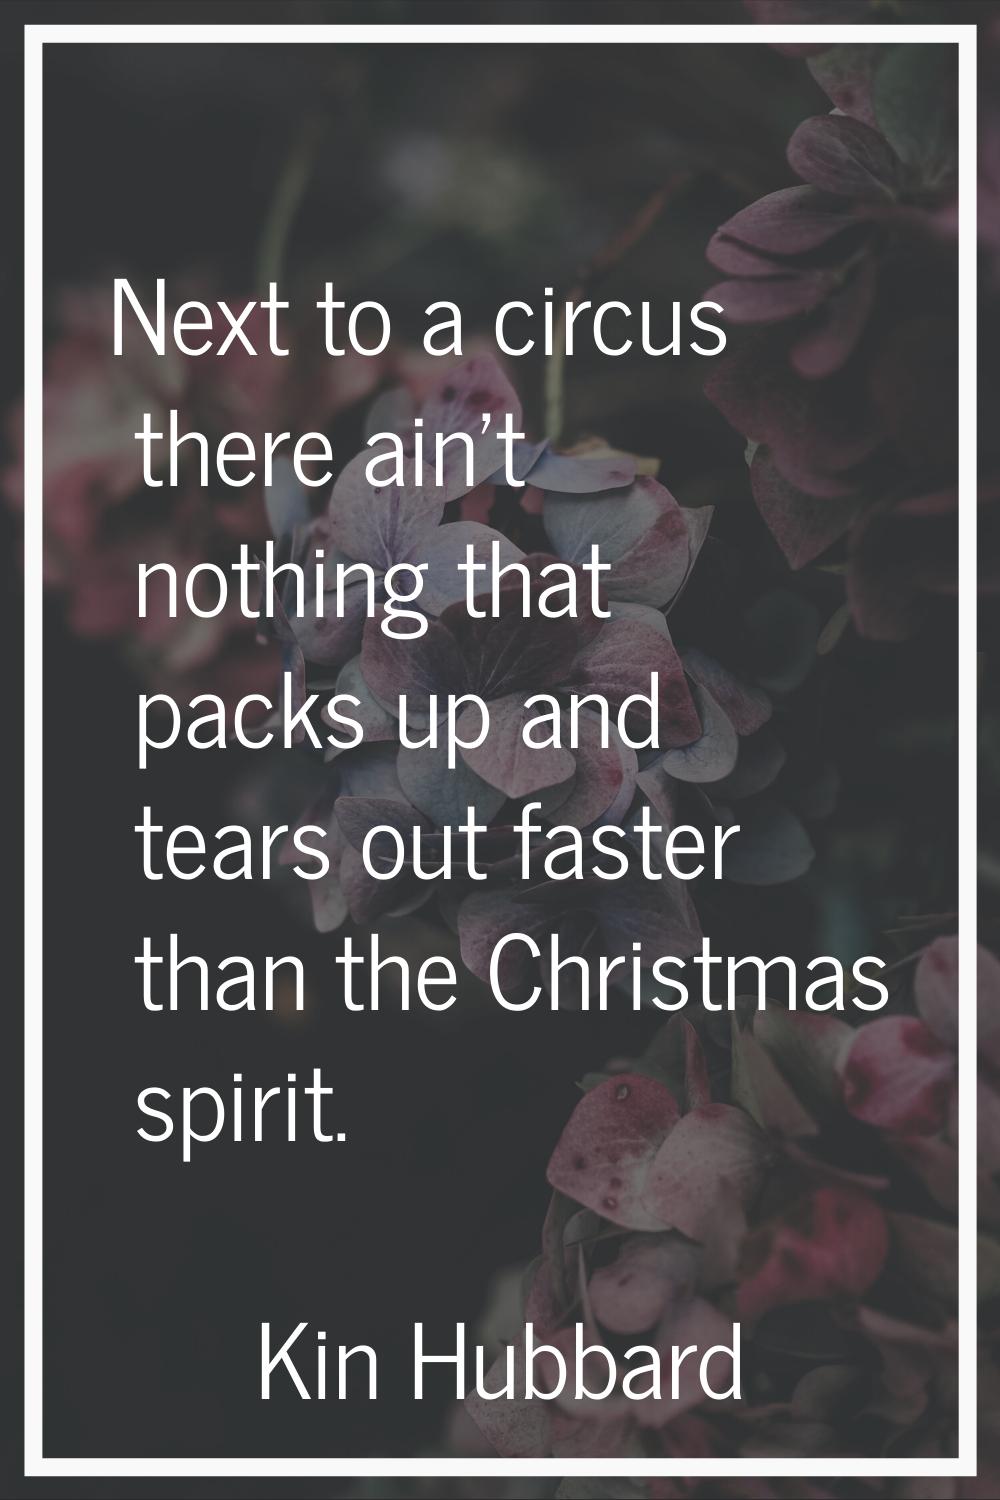 Next to a circus there ain't nothing that packs up and tears out faster than the Christmas spirit.